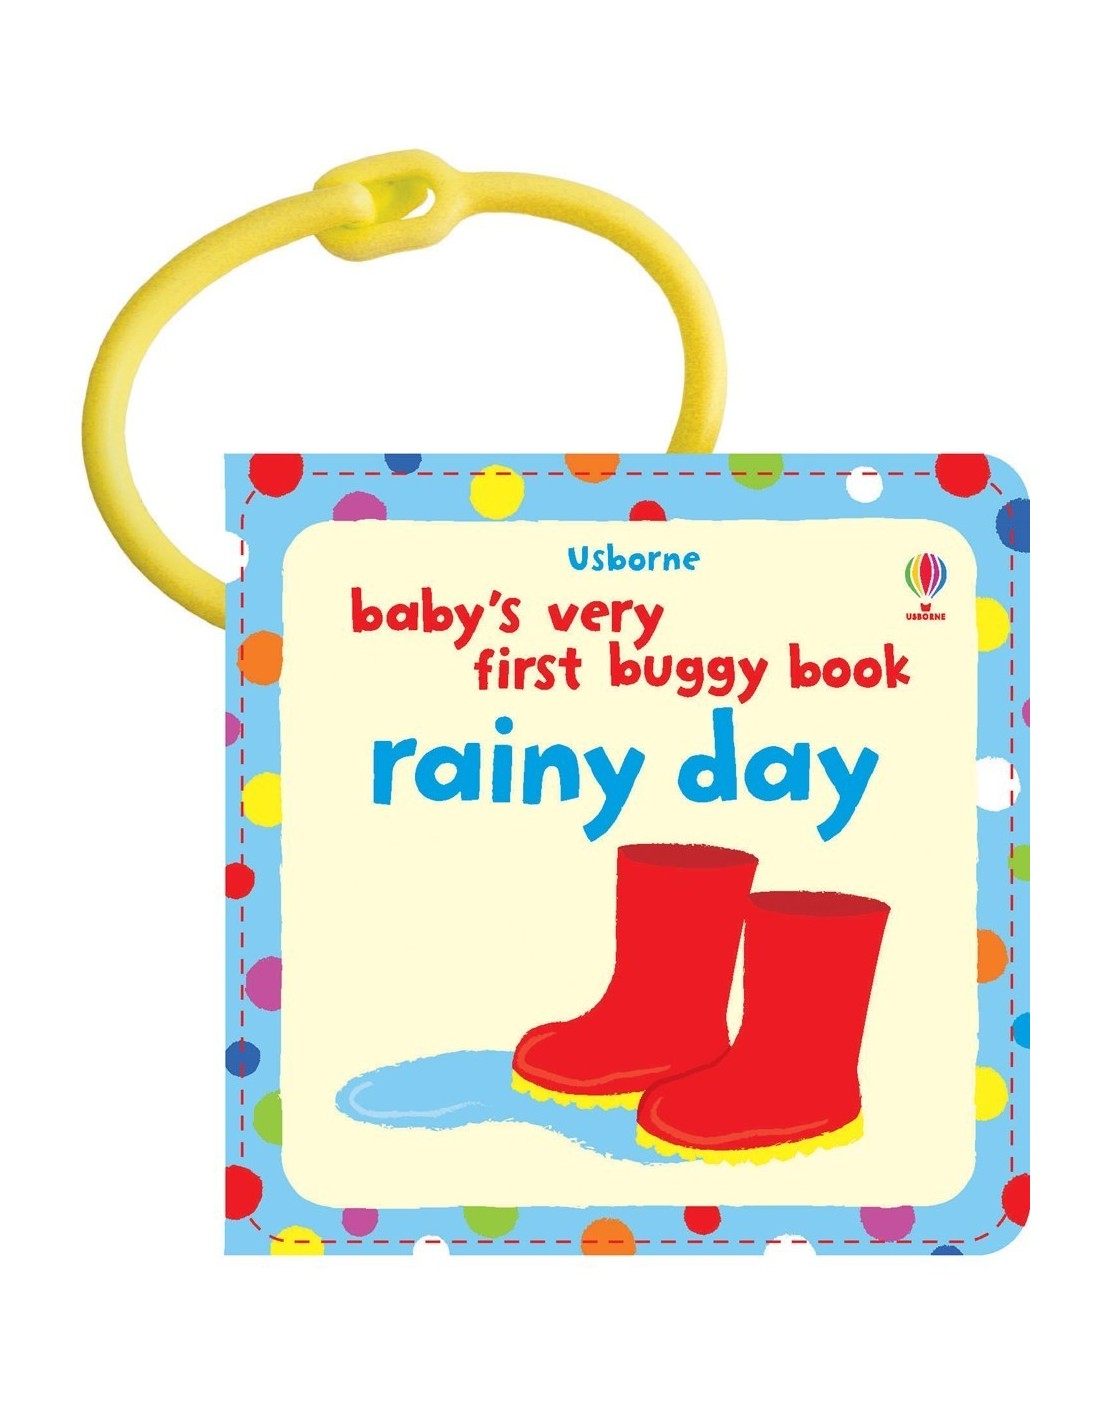 Rainy day buggy book